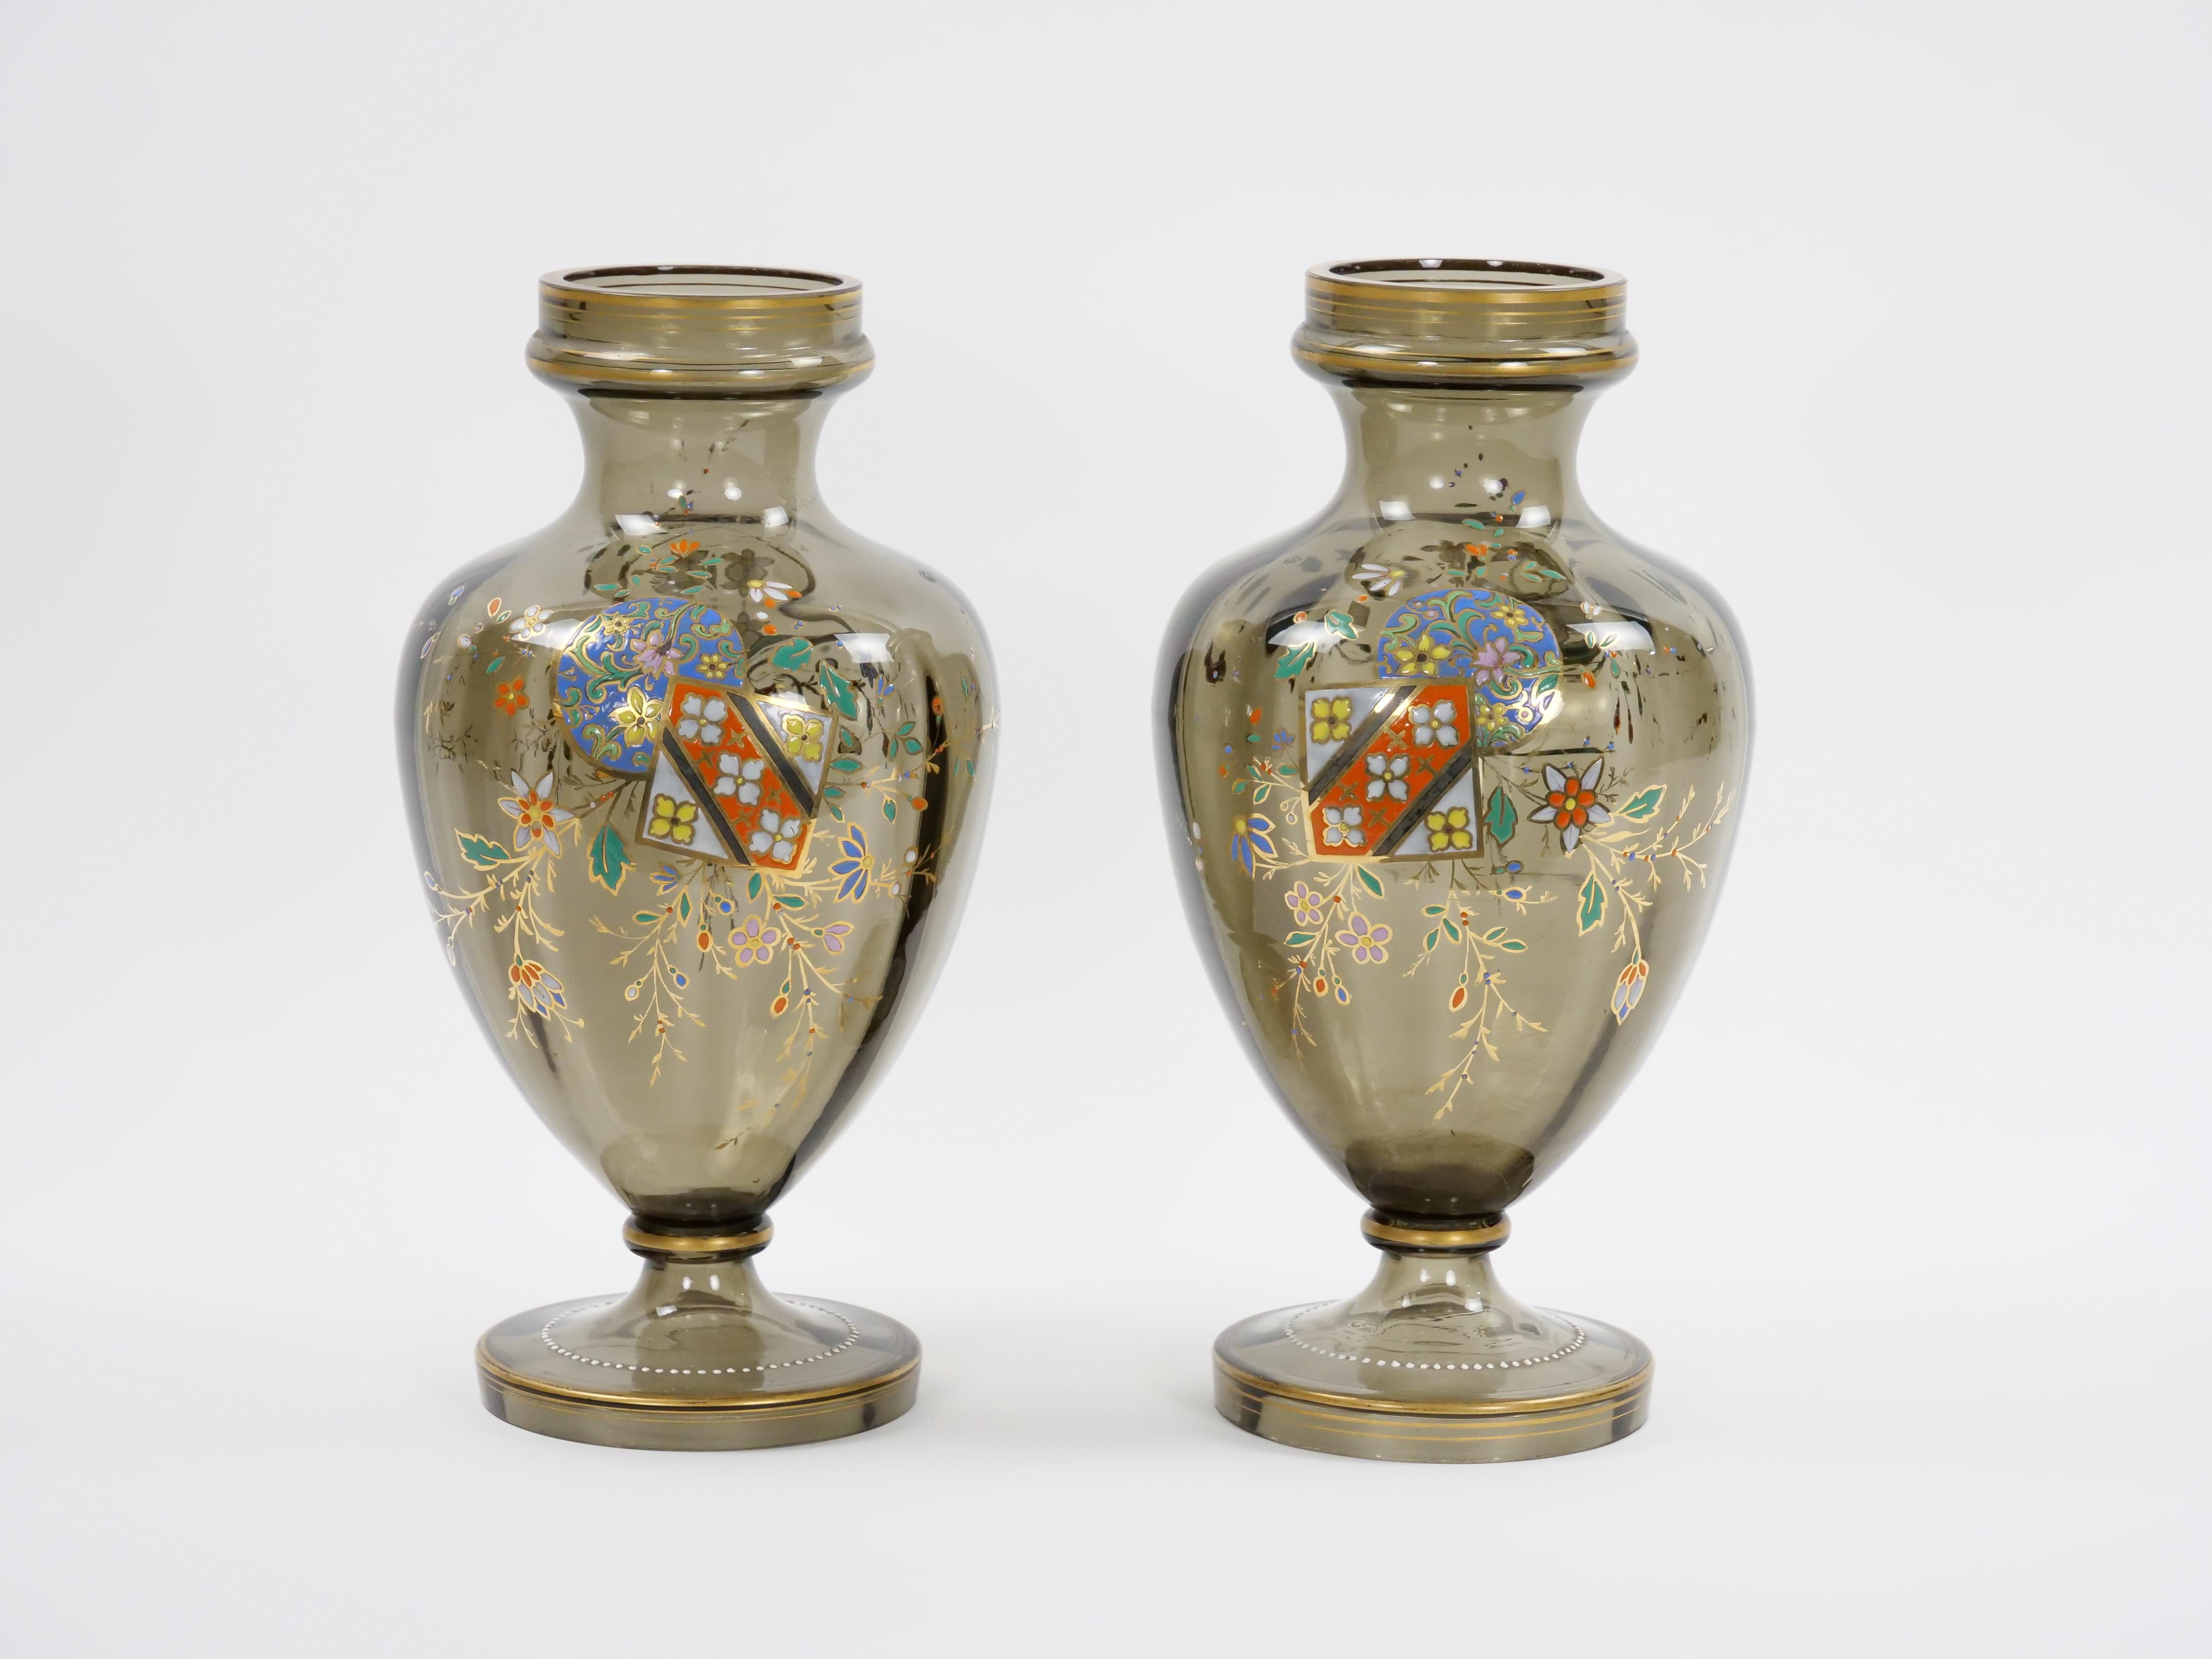 Experience the allure of the past with this captivating pair of antique French hand-gilt and decorated enameled gray-tinted glass vases. These vases are not just decorative pieces; they are portals to a bygone era of opulence and artistic finesse.